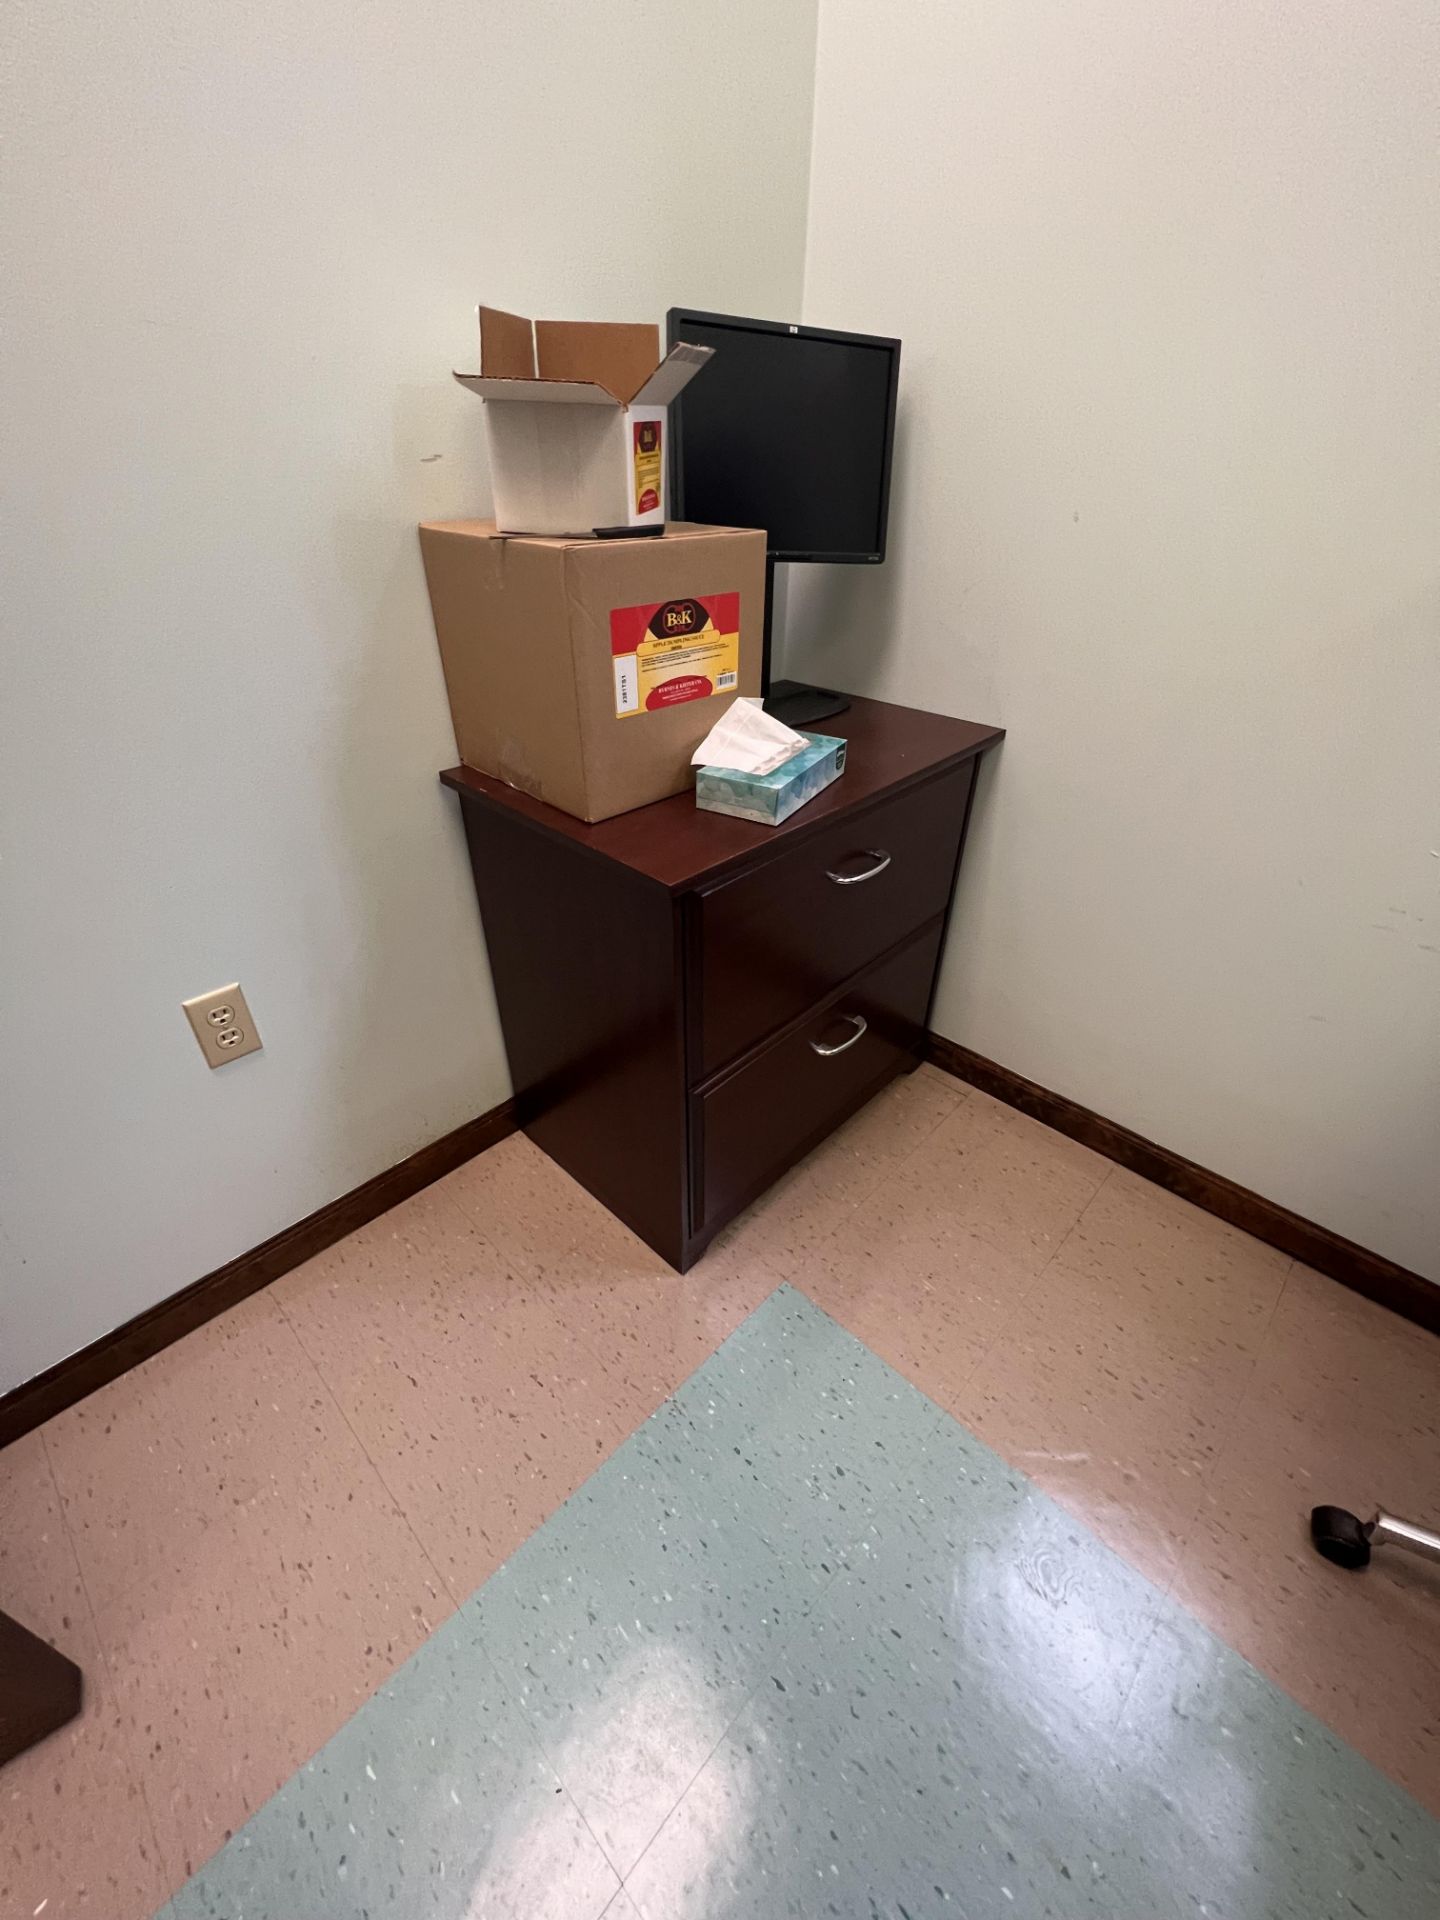 CONTENTS OF OFFICE, INCLUDES DESK, CABINETS, CHAIRS, ETC, DOES NOT INCLUDE PHONE OR COMPUTER - Image 4 of 4